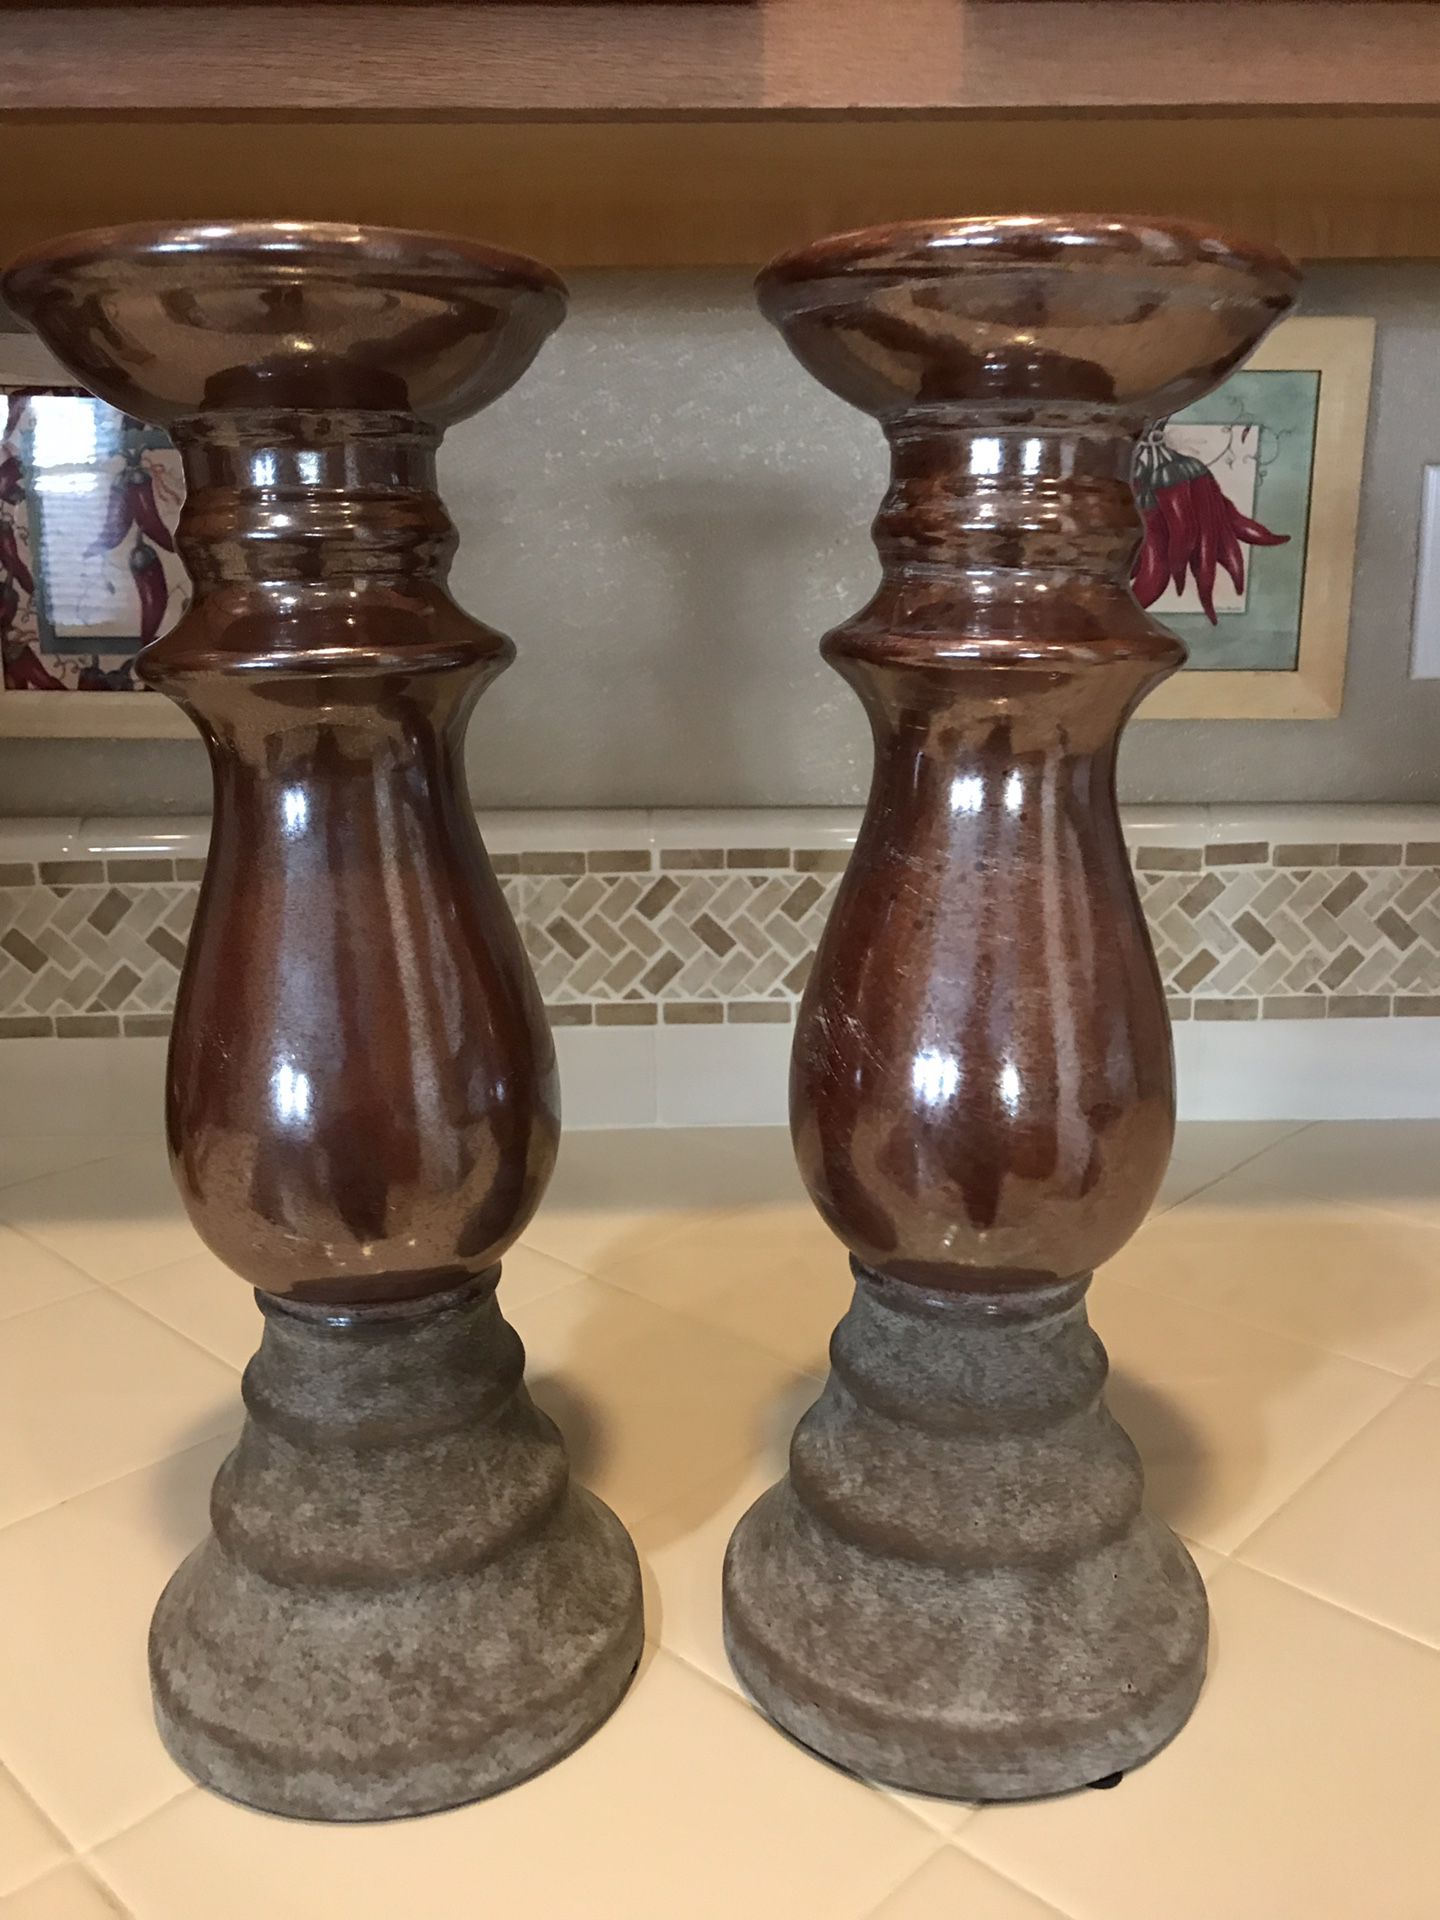 Gorgeous Candle Holders